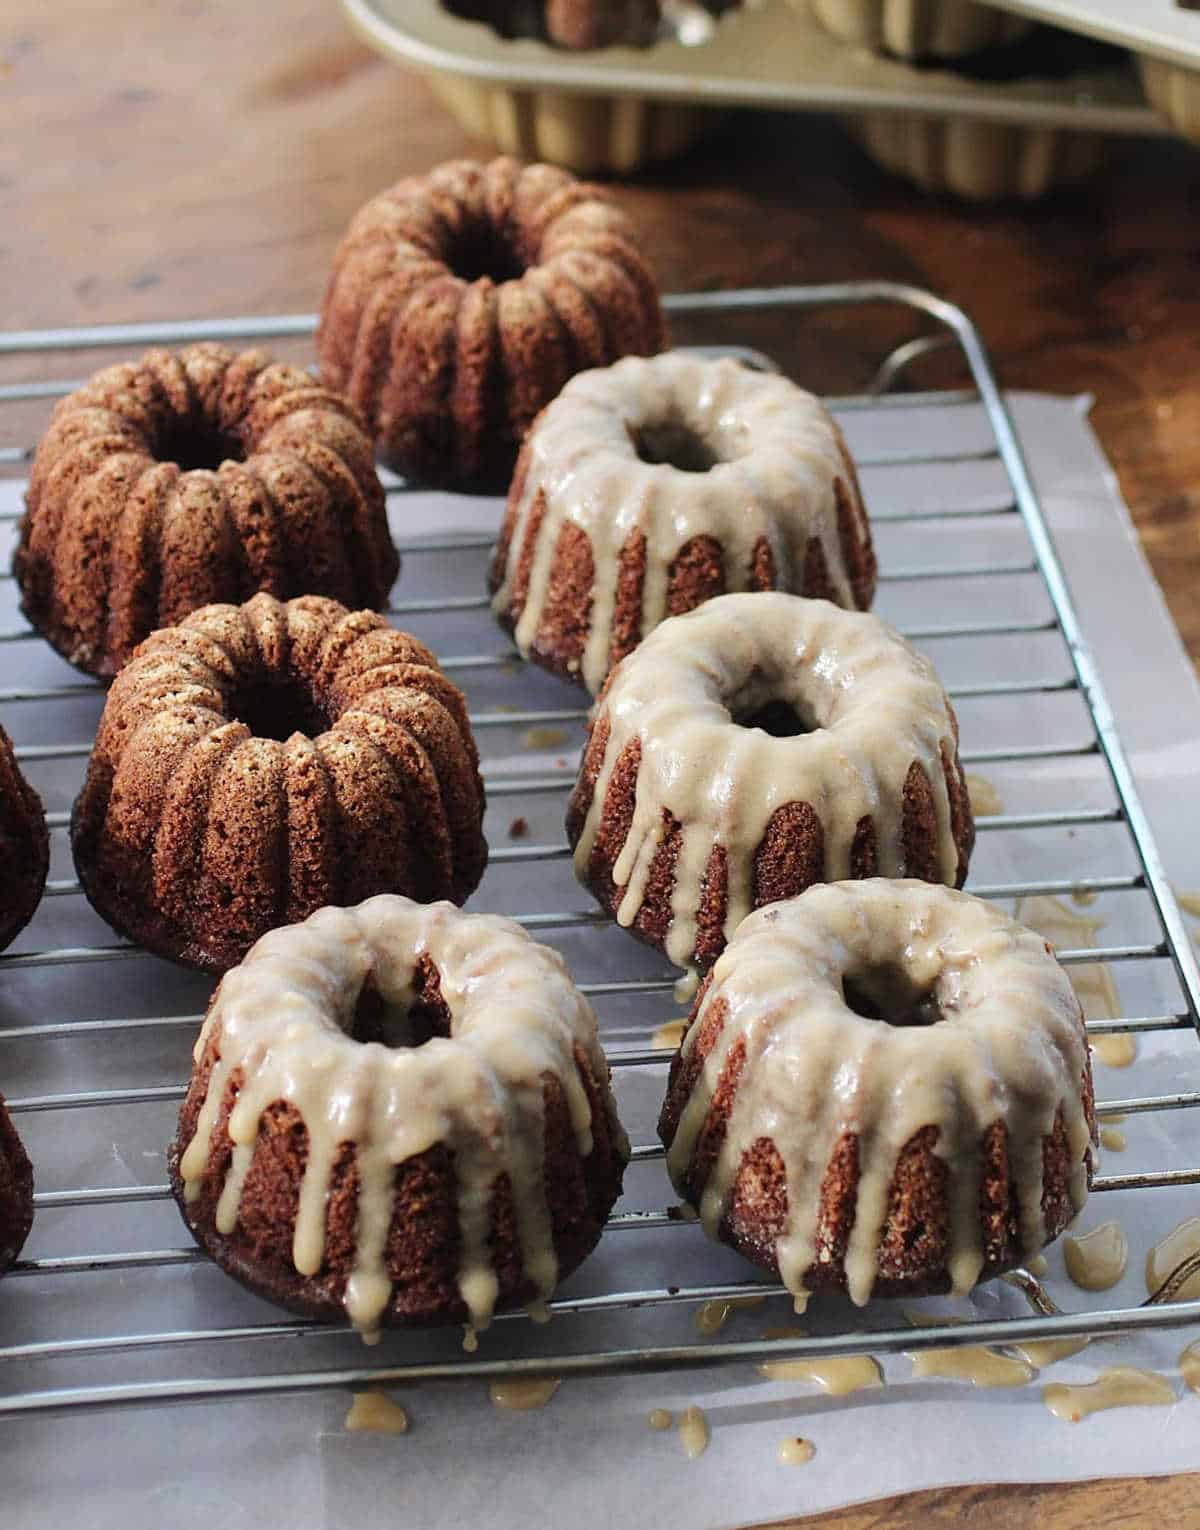 Top view of glazed and plain chocolate mini bundt cakes on a cooling rack with parchment paper below.